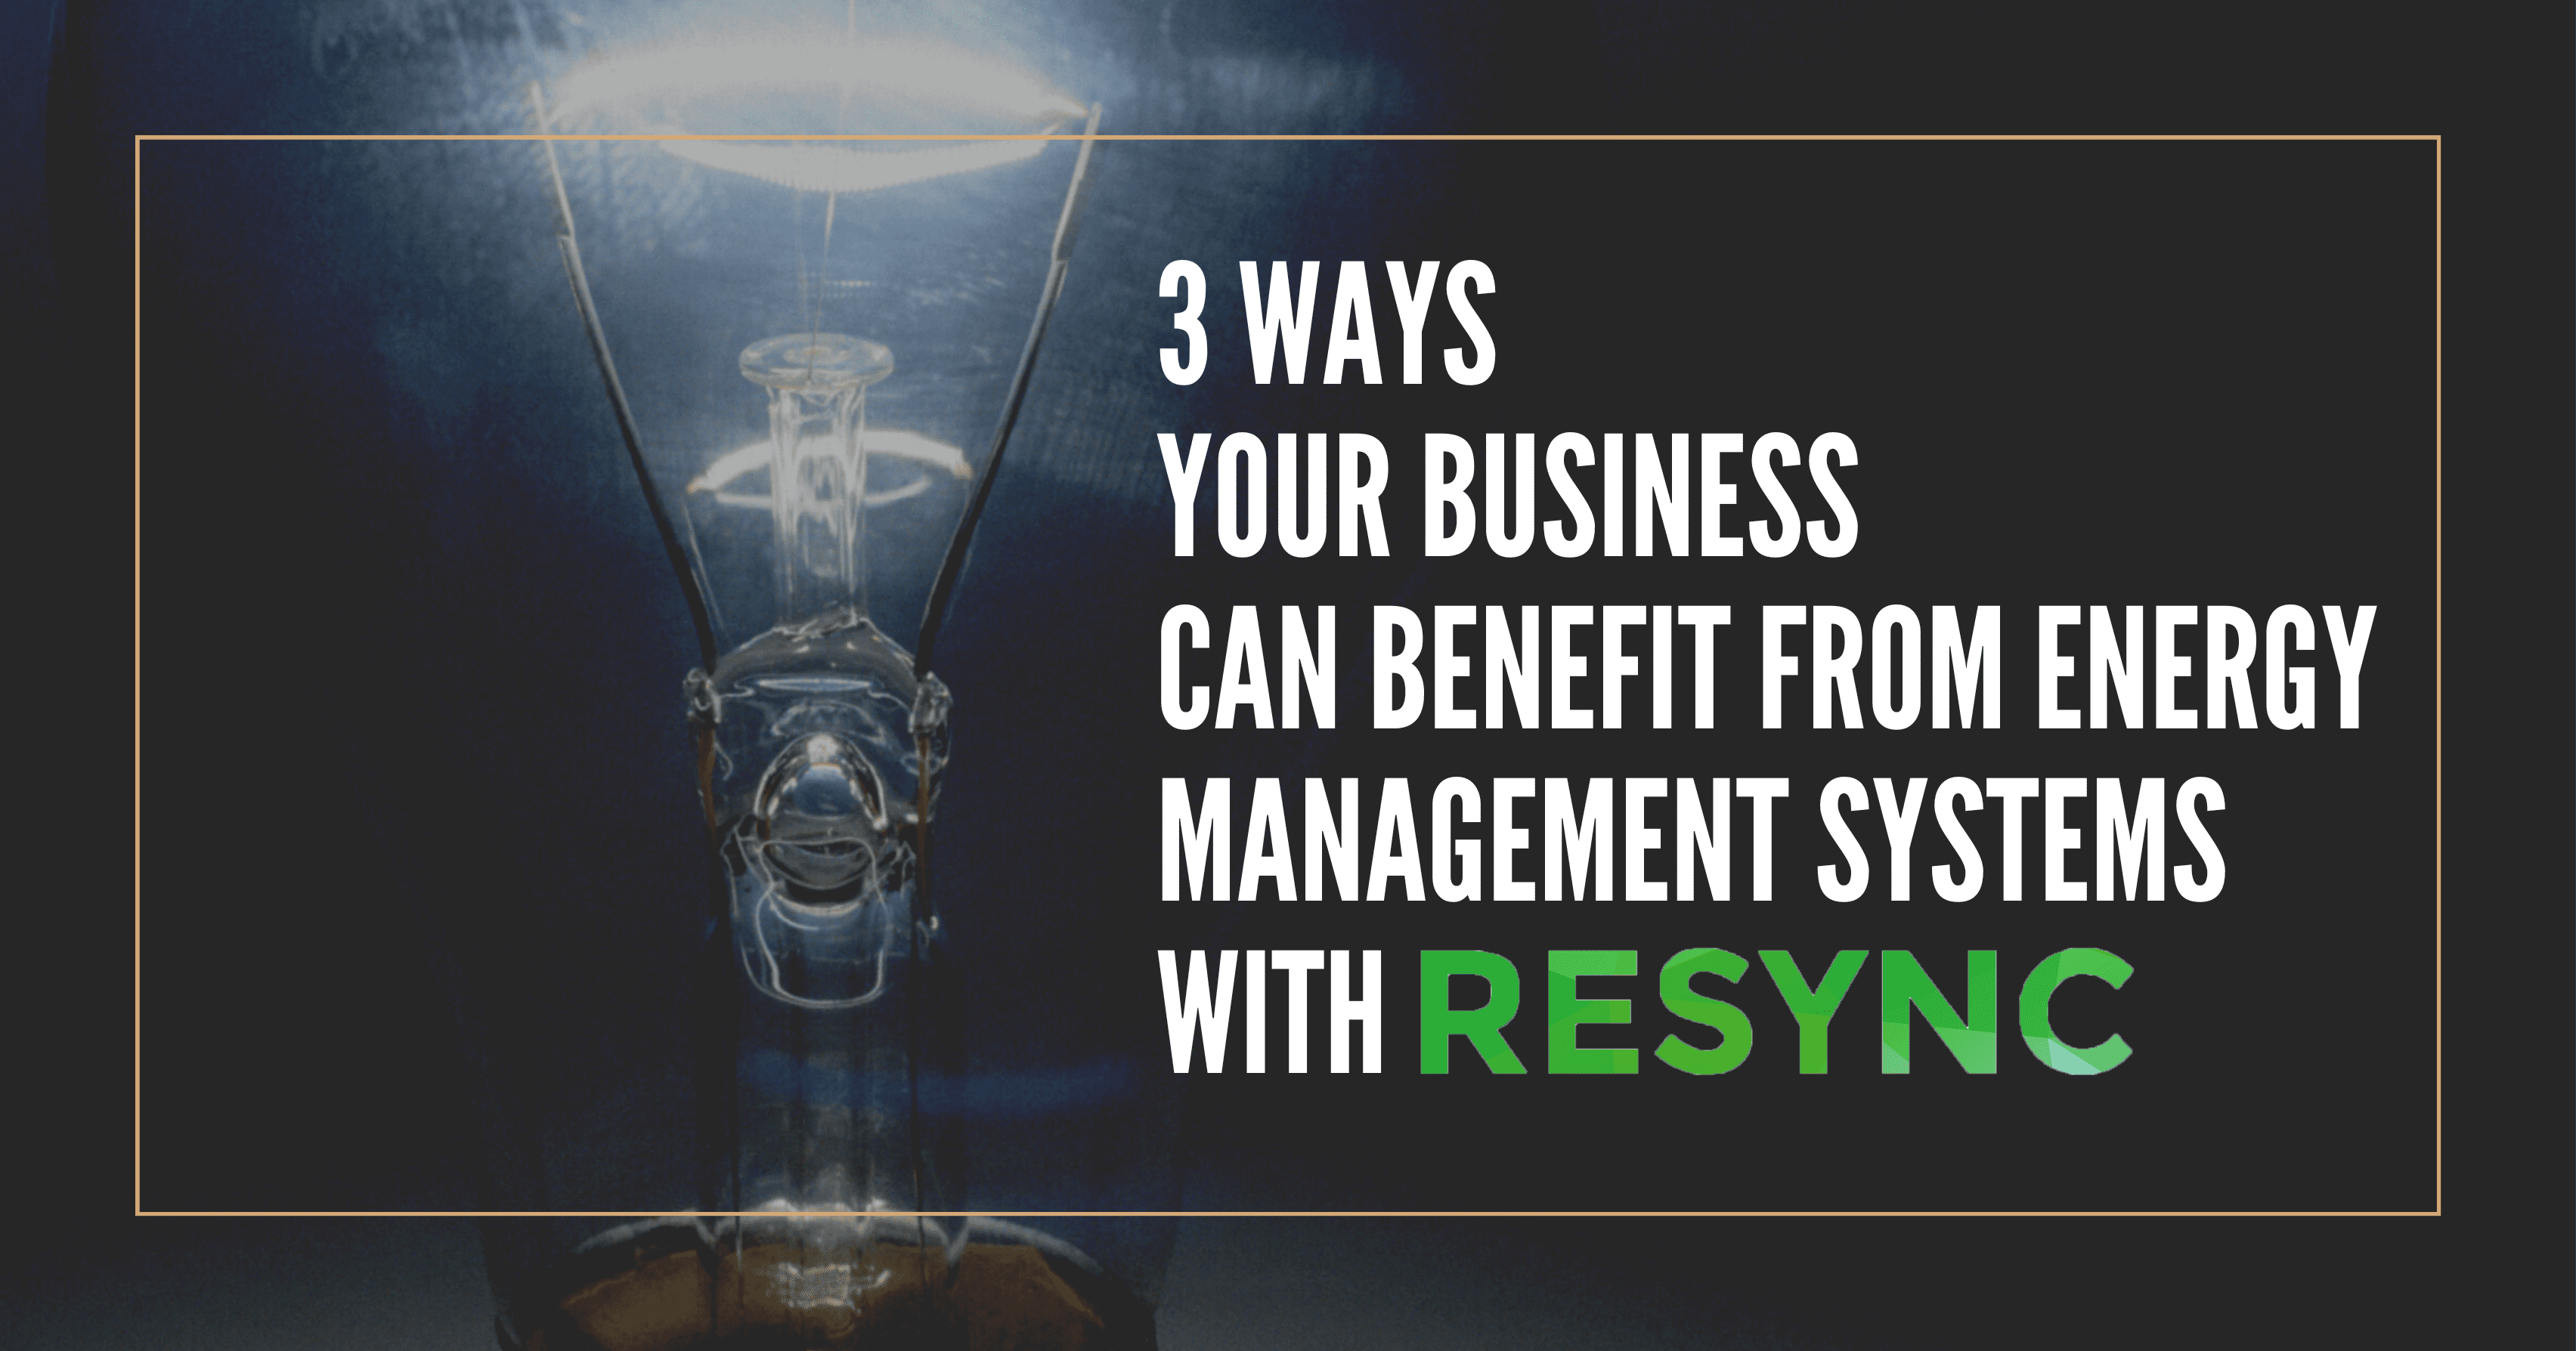 3 Ways your Business can Benefit from Energy Management Systems